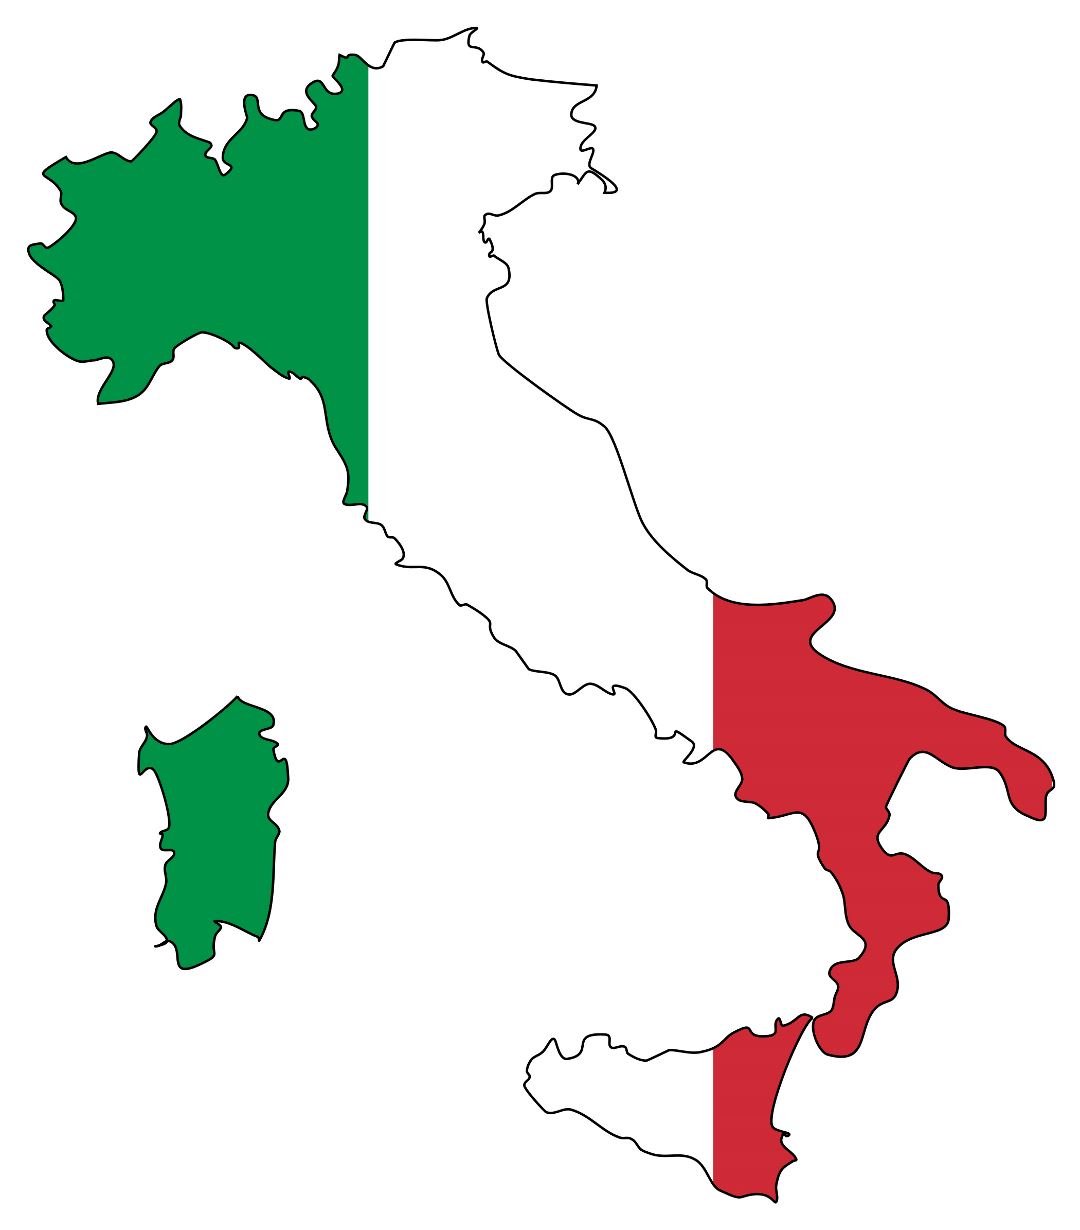 Large flag map of Italy